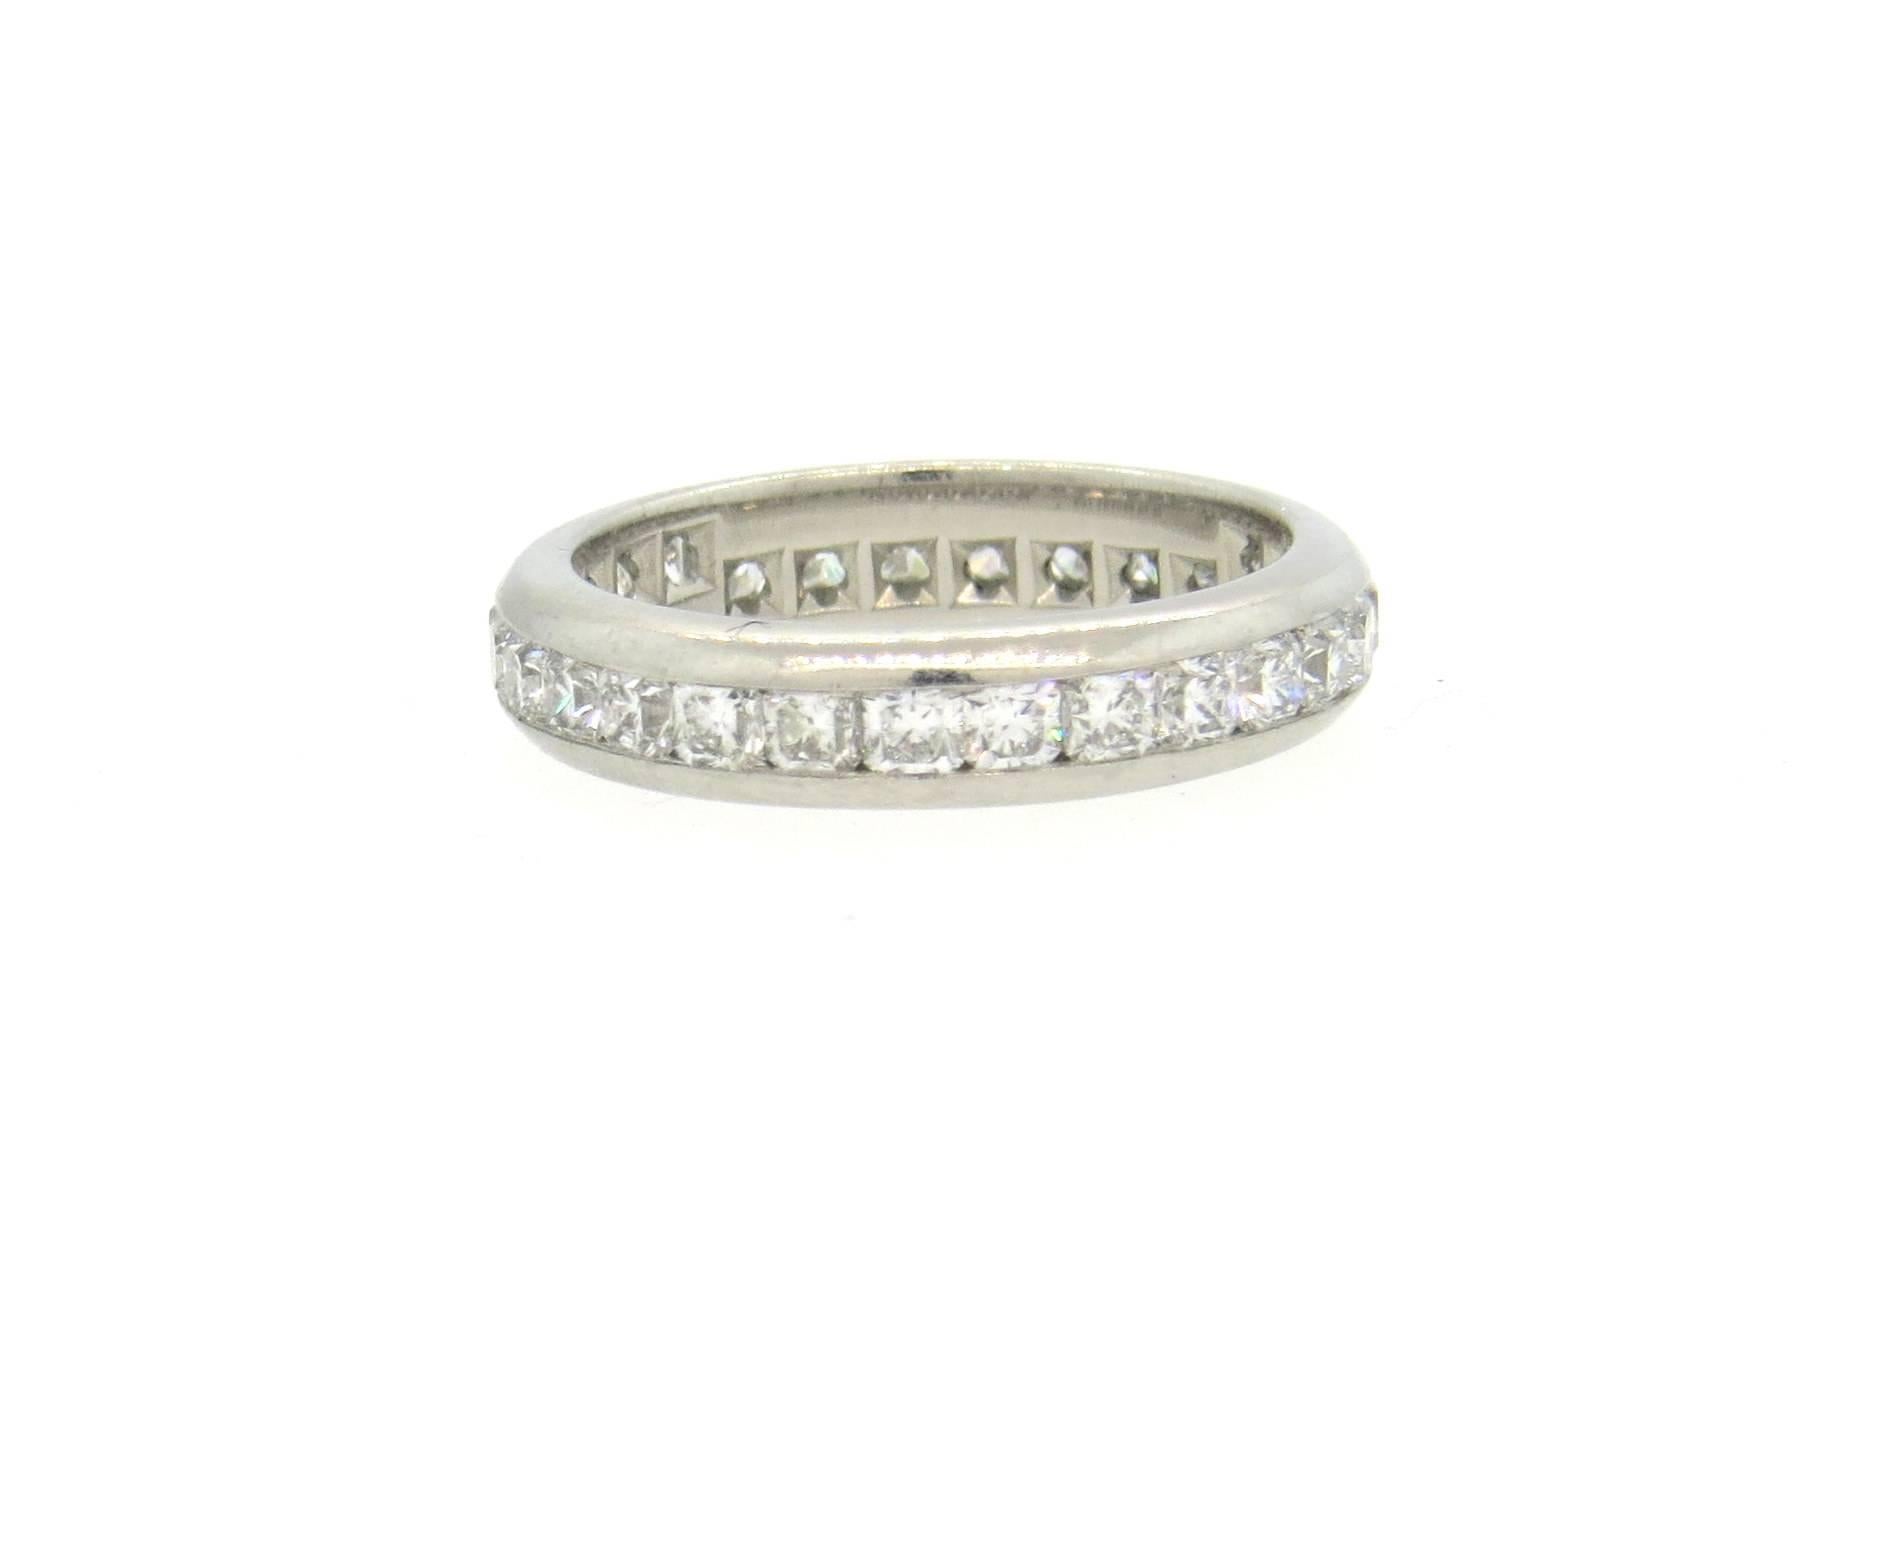 Gorgeous and classic platinum 4mm wedding band ring, crafted by Tiffany & Co for Lucida collection, set with a full circle of G/VS diamonds - a total of approximately 1.10ctw. Ring is a size 4 3/4. Marked T & Co, pt950, Lucida, pat. 597044 et al.